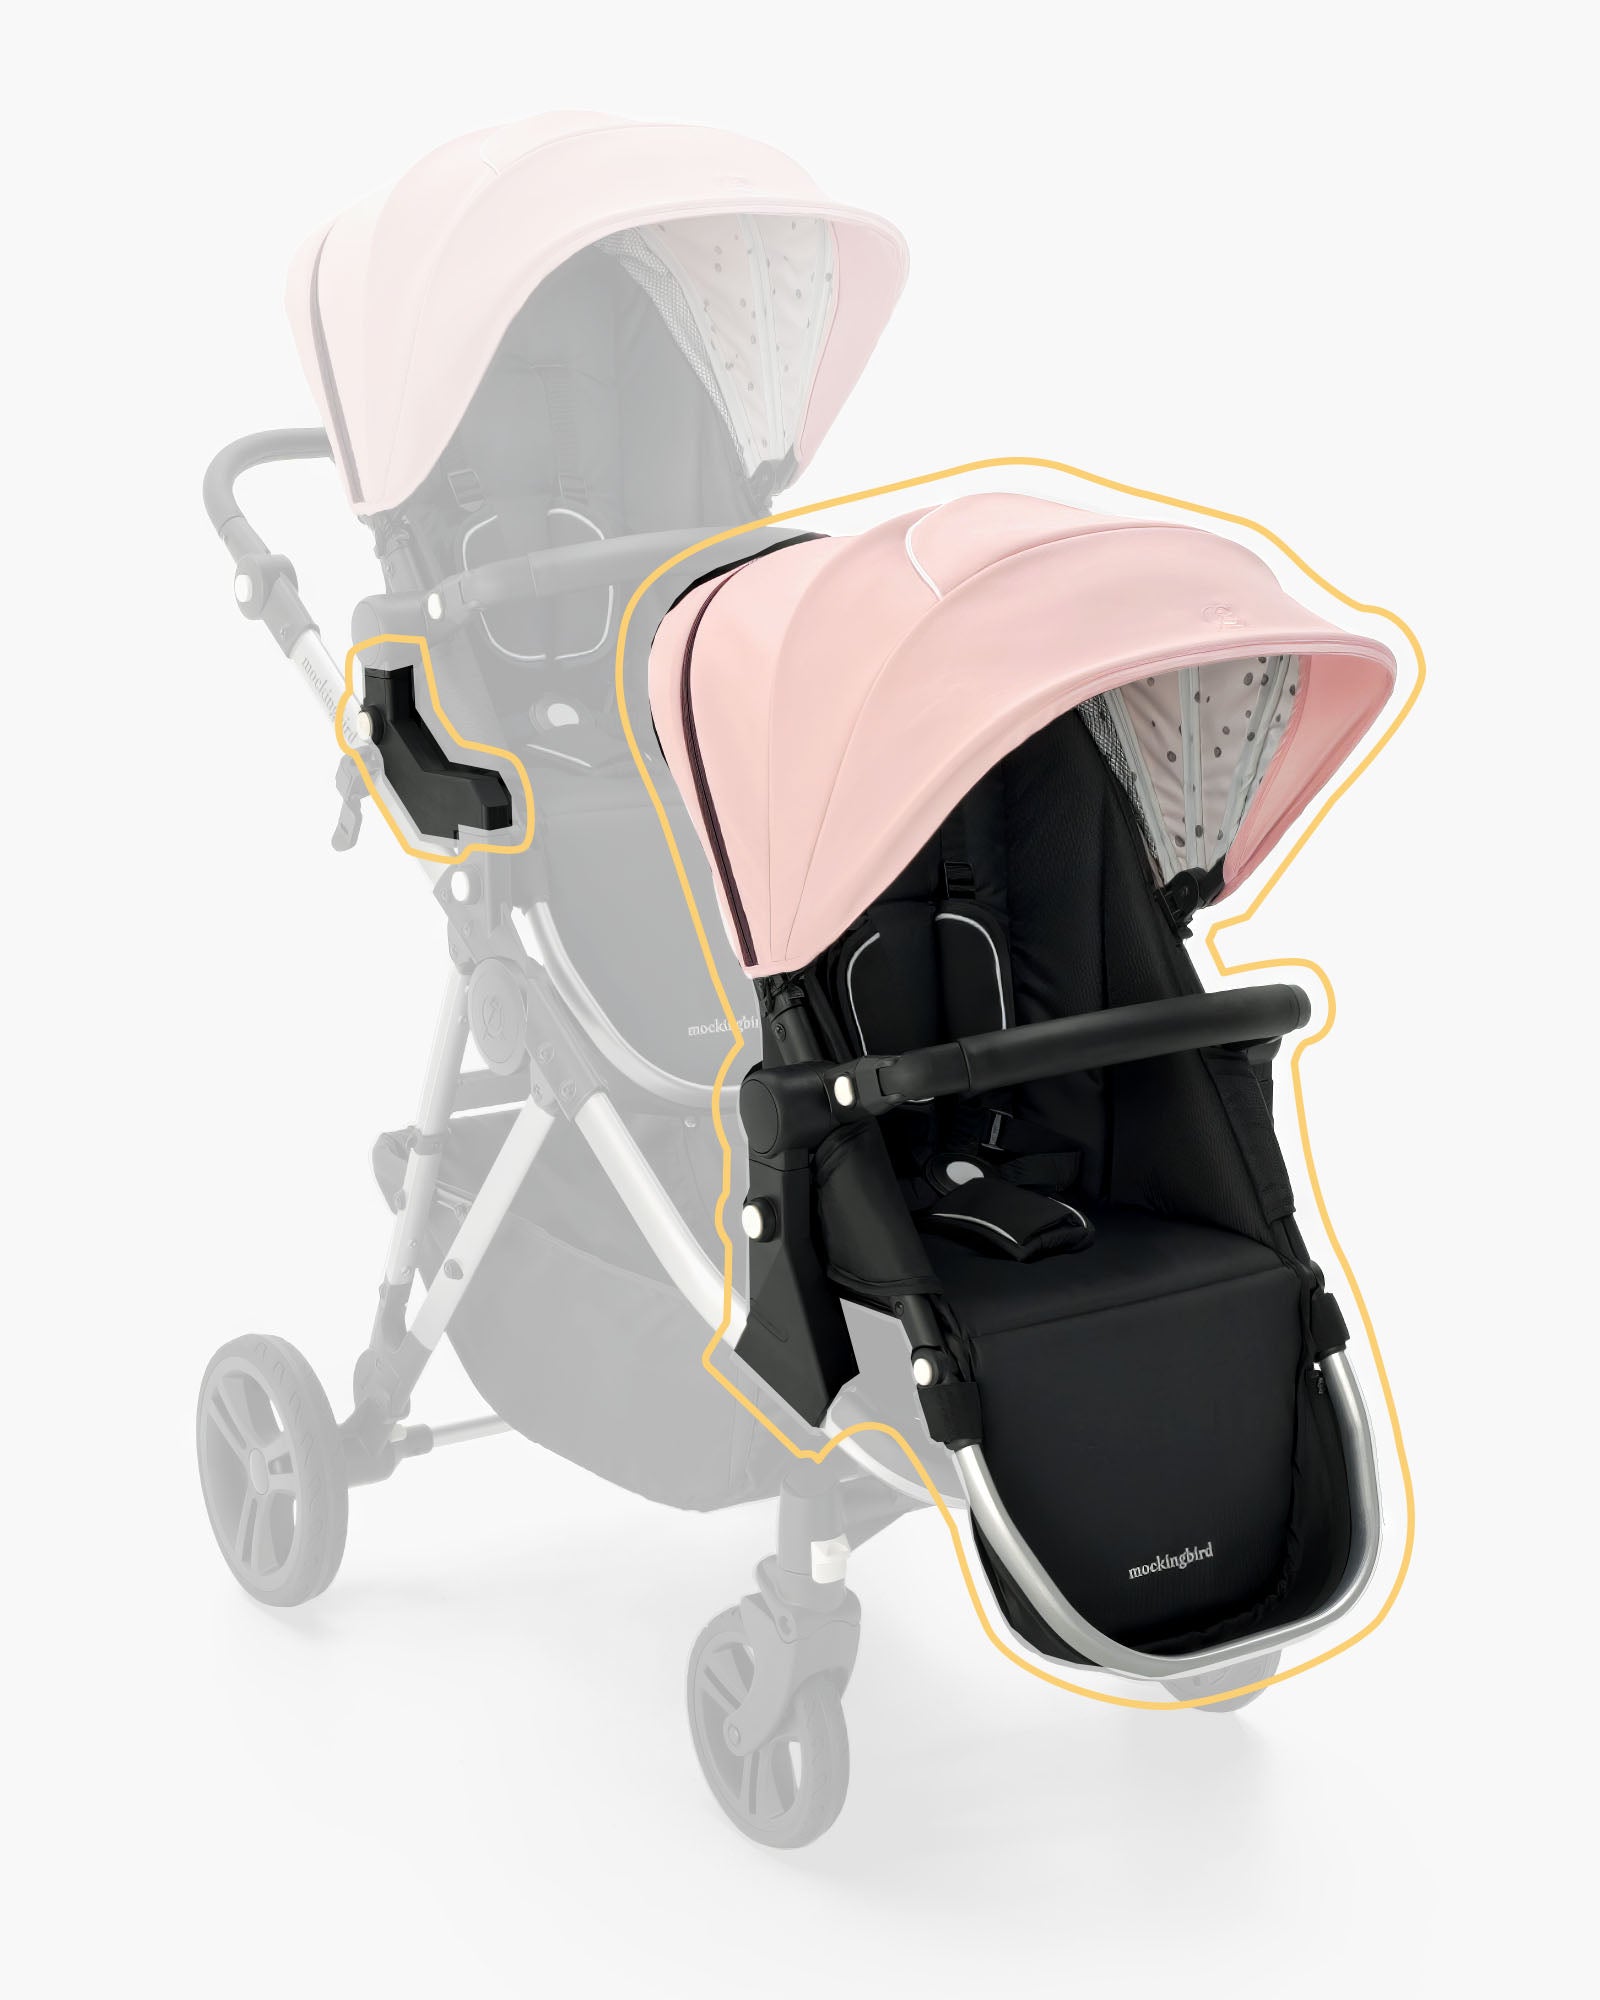 A mockingbird 2nd Seat Kit 2.0 with a pink extendable canopy, black seat, and grey frame, highlighted with an orange outline, shown from two different angles. #color_bloom